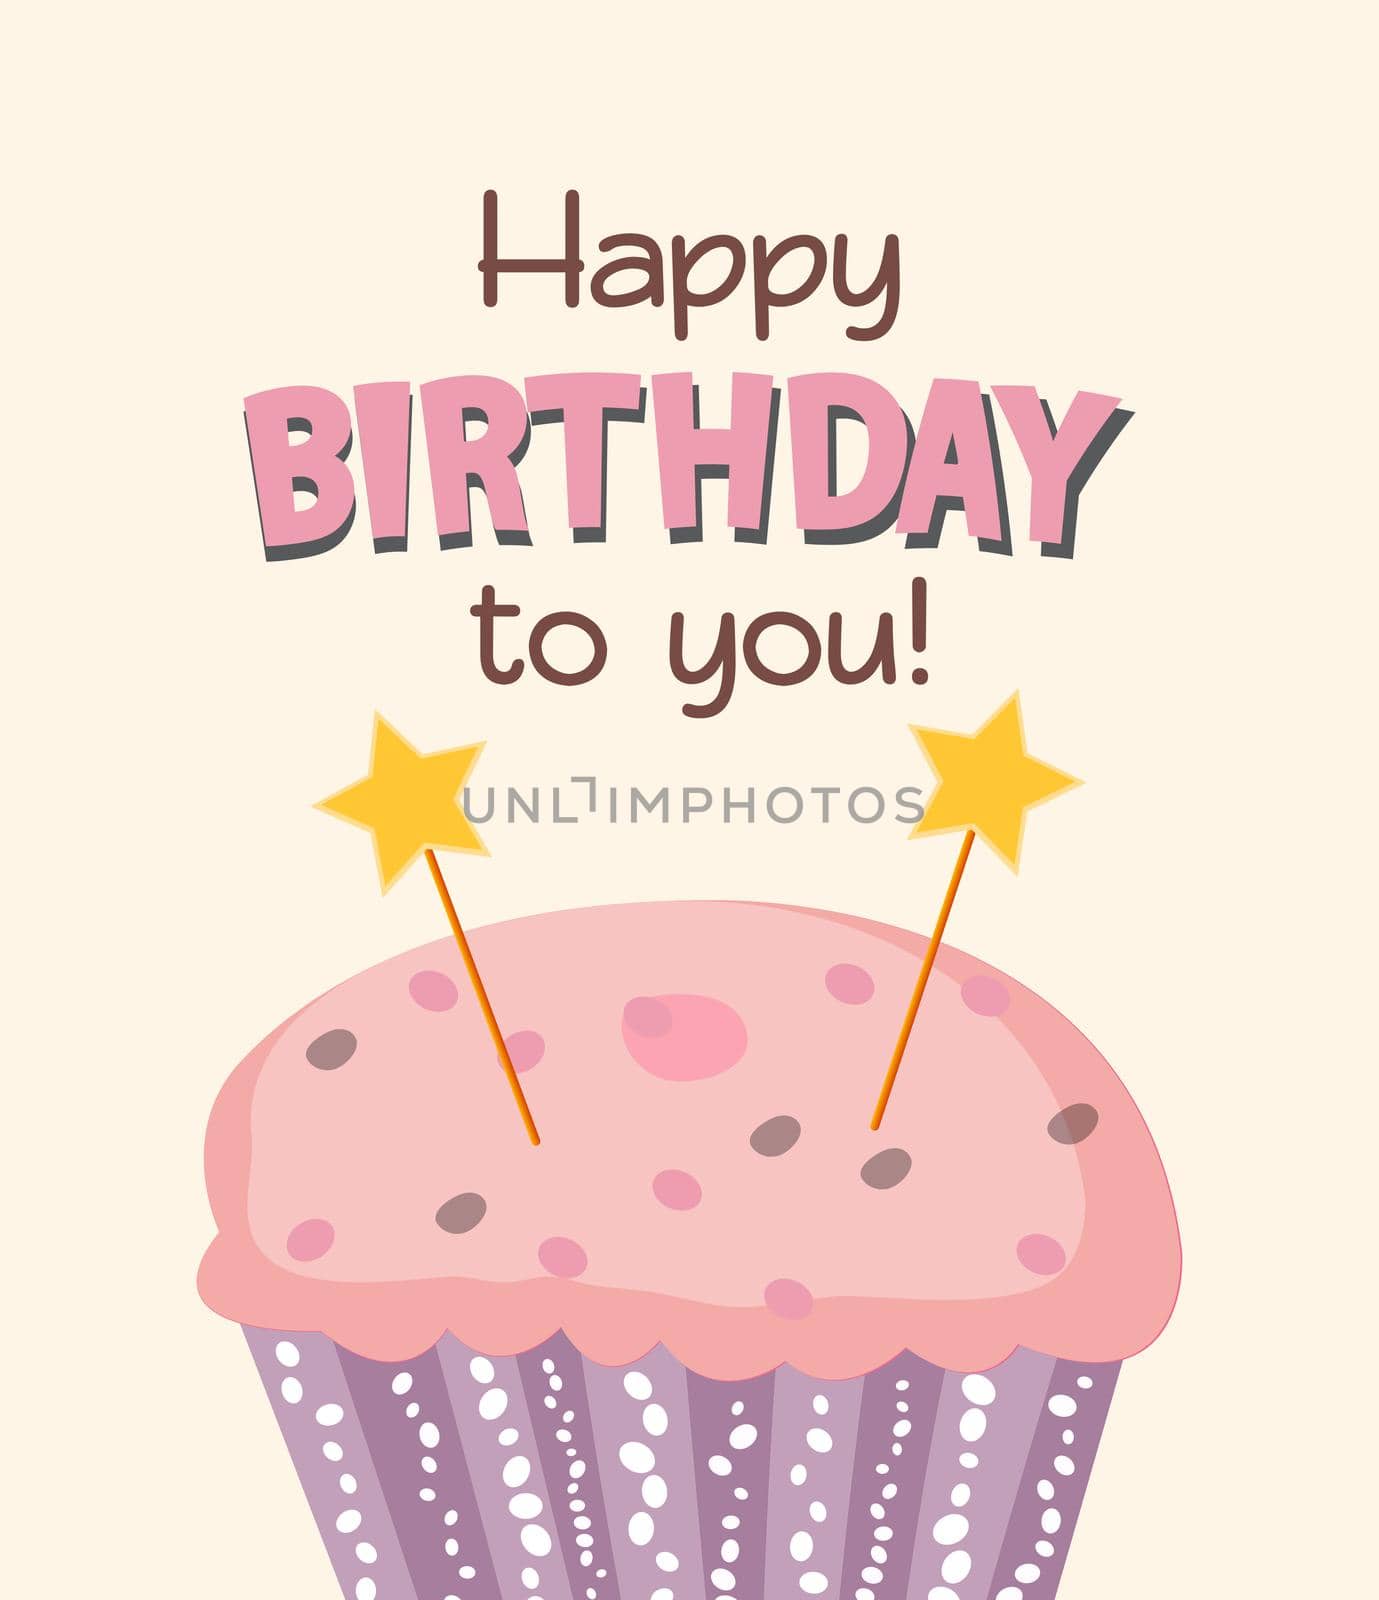 Happy Birthday Card Baner Background with Cake. Vector Illustration EPS10